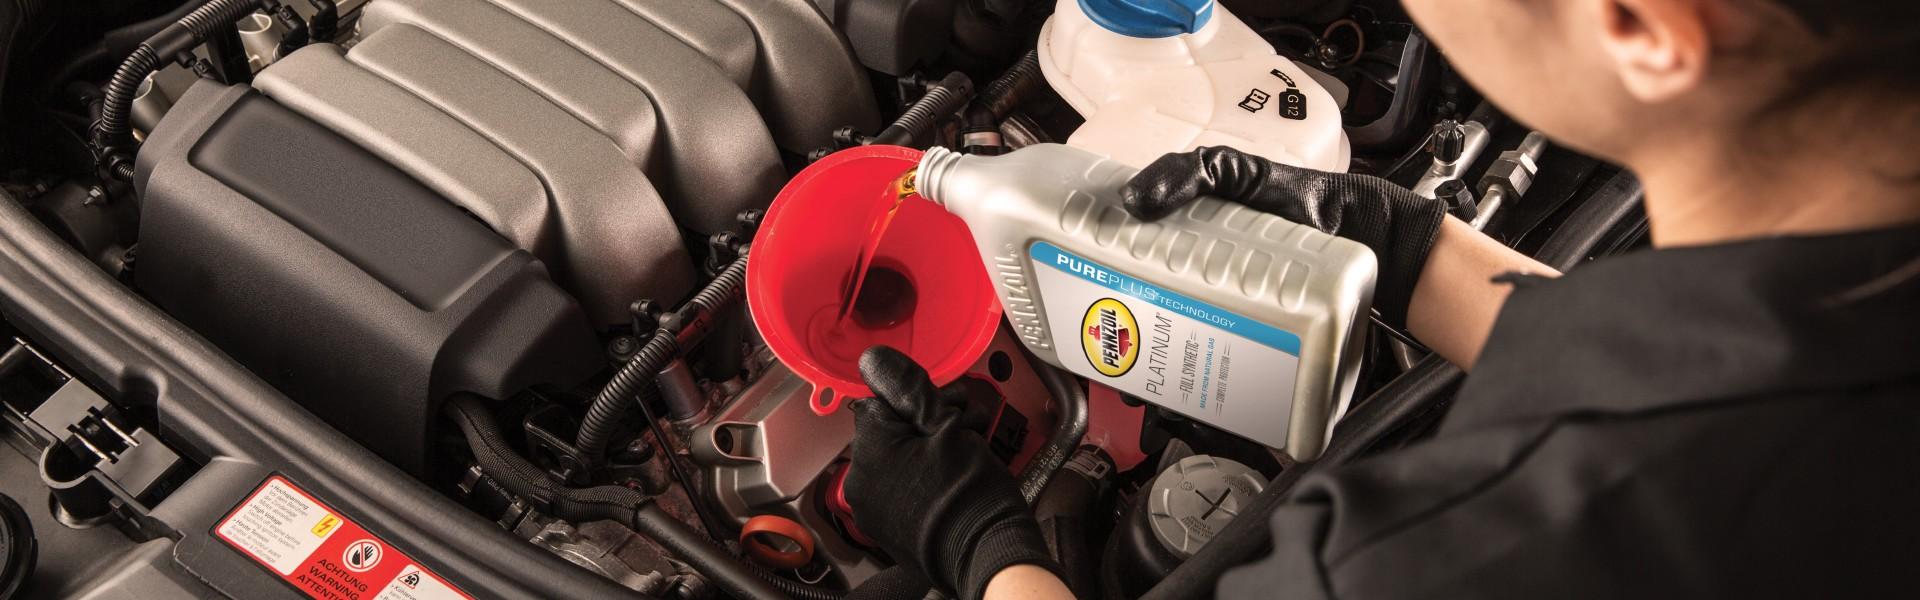 How Much Does It Cost To Replace Fuel Filter At Jiffy Lube?